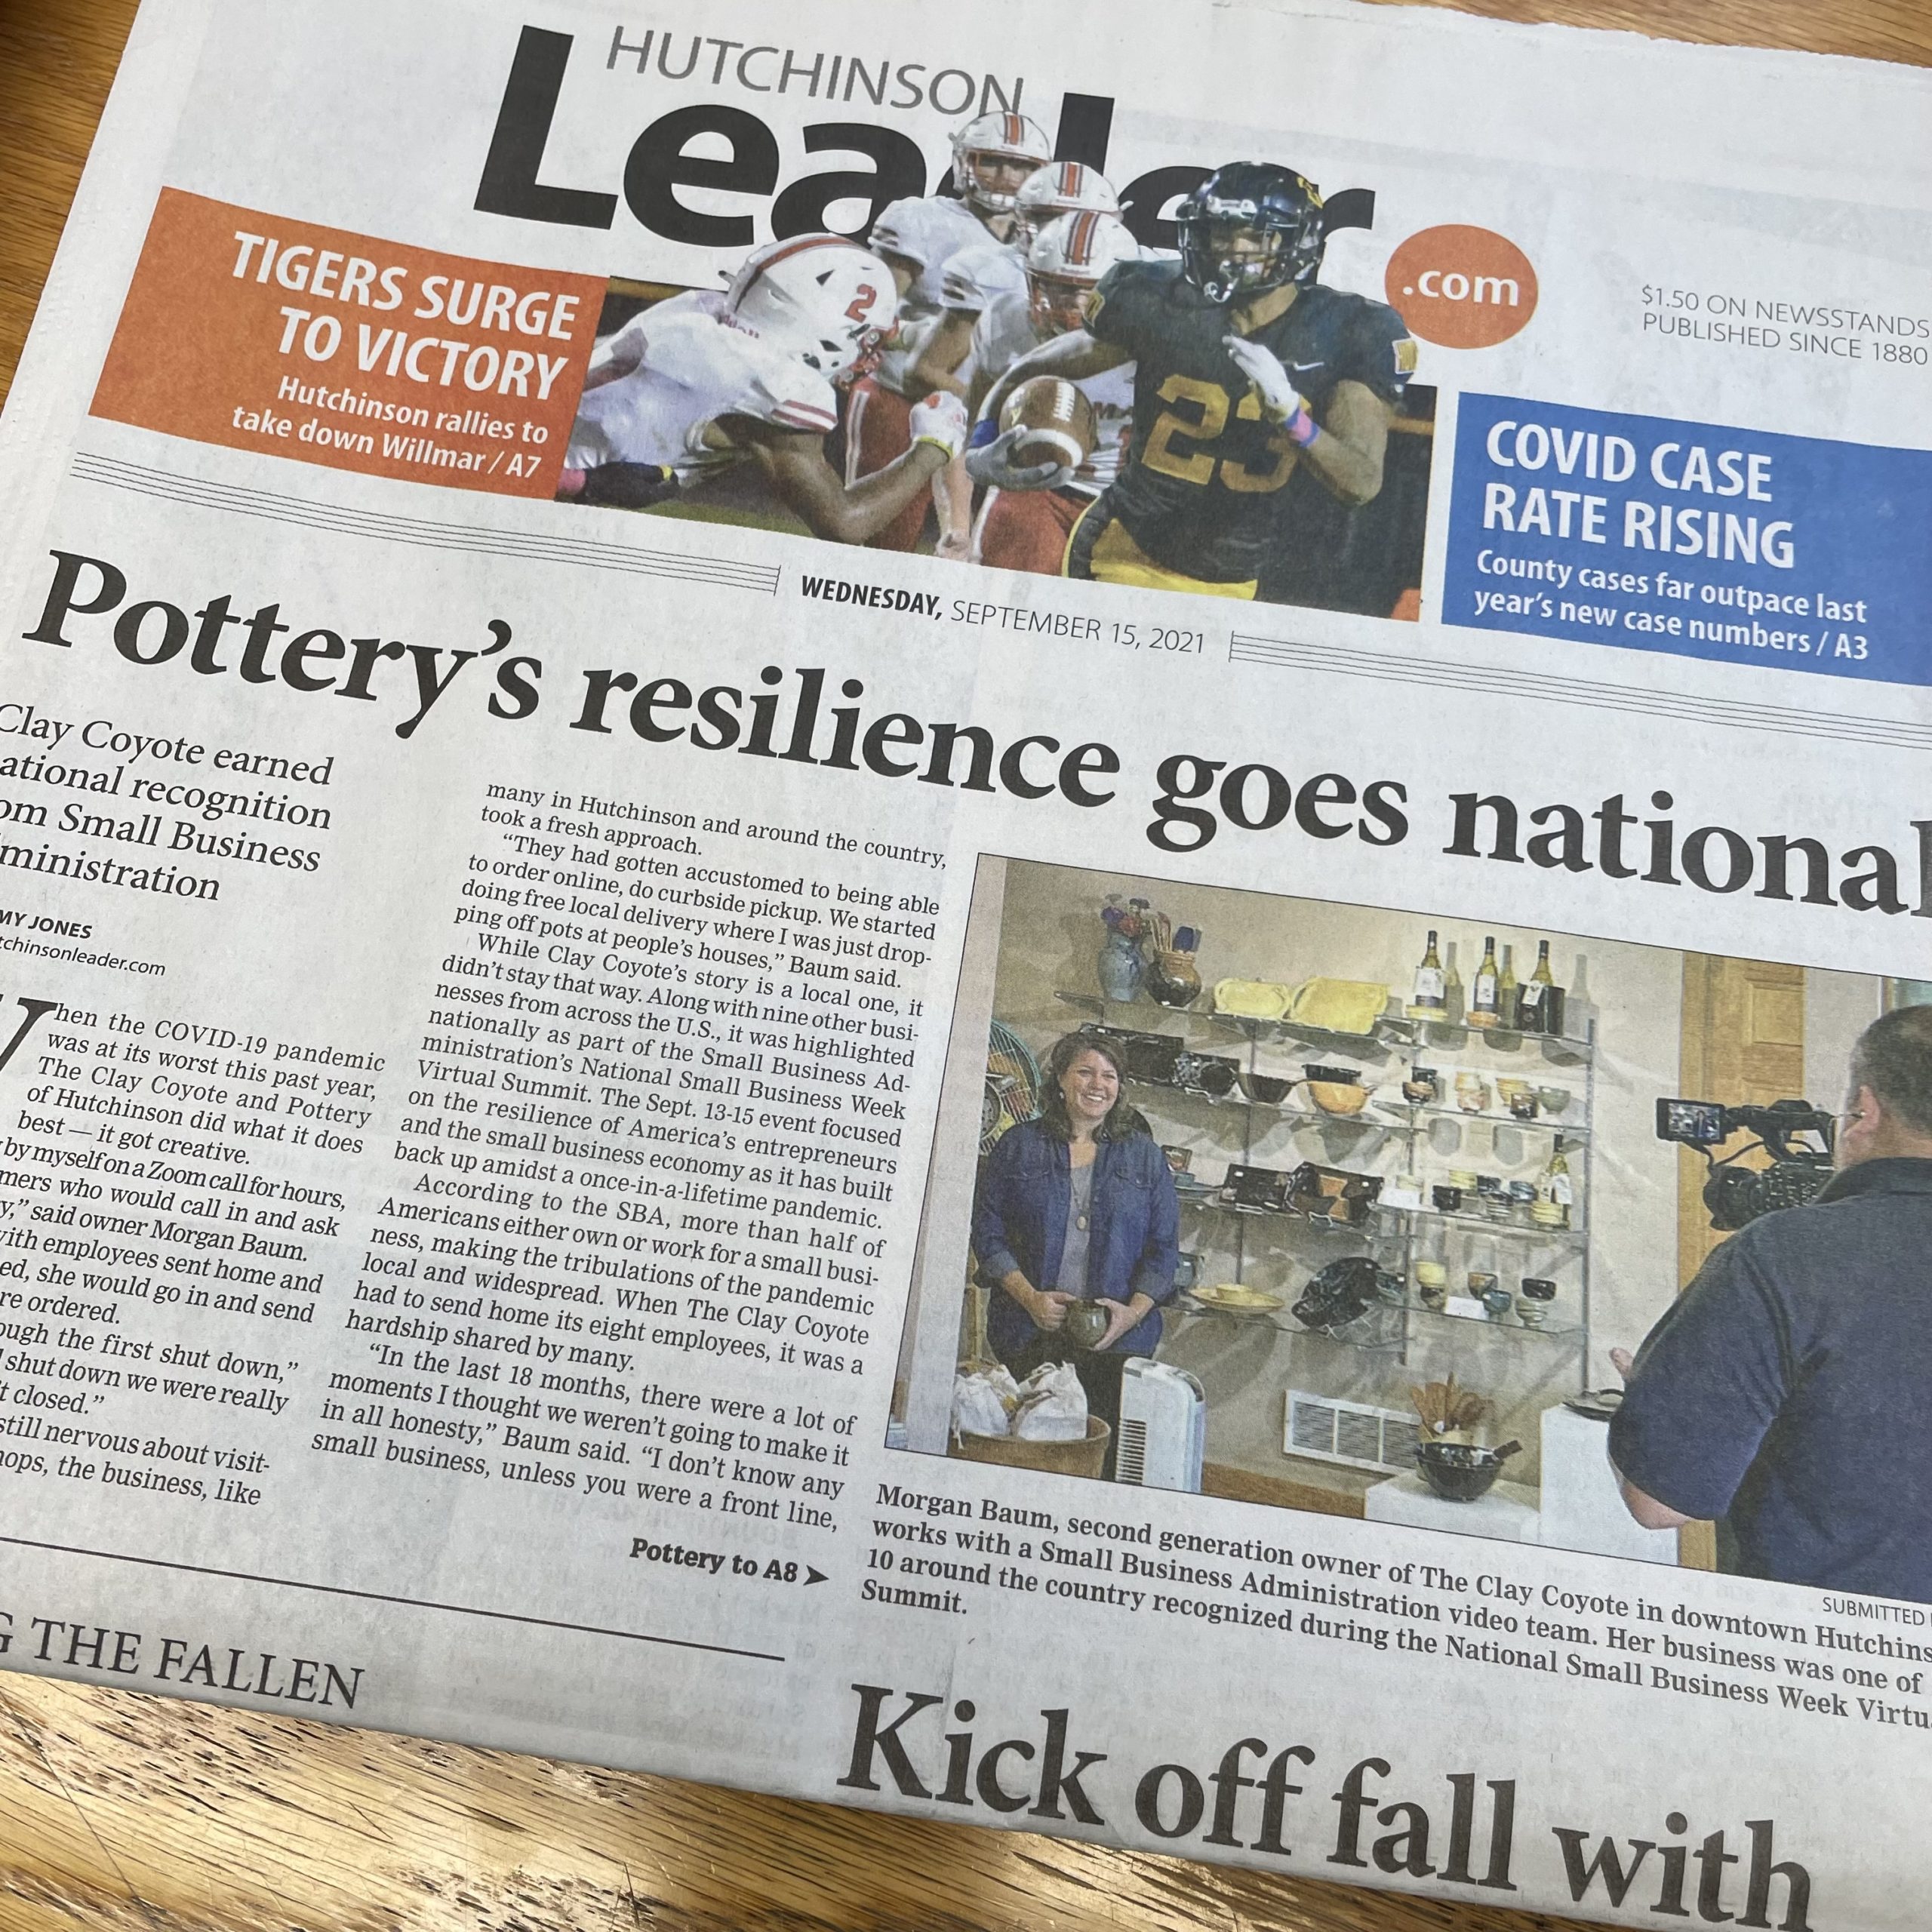 Clay Coyote featured in Hutchinson Leader for Small Business Week 2021 